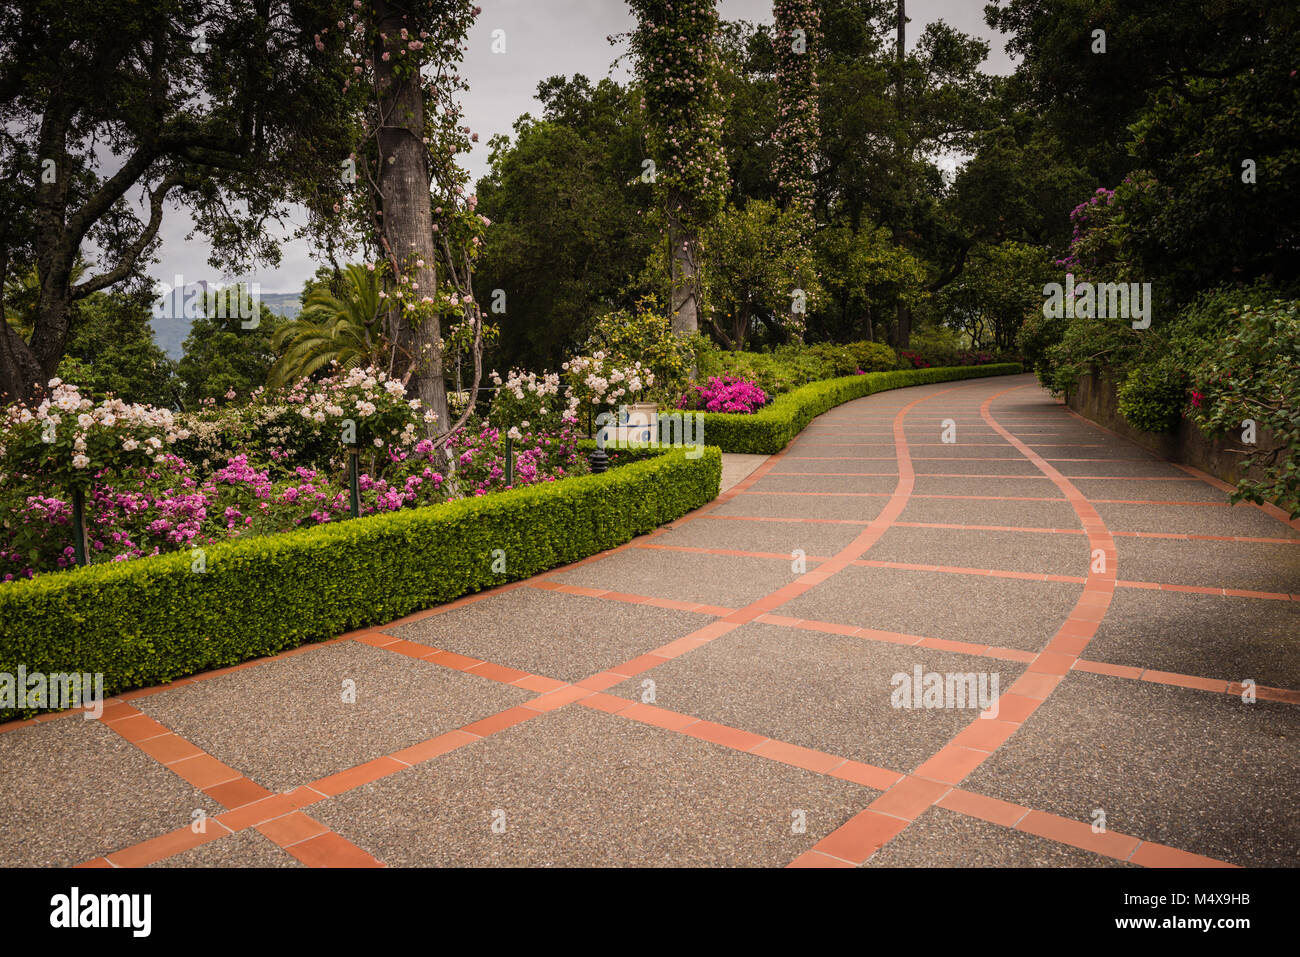 San Simeon, CA. Serpentine garden path, marked by red tile and concrete squares, bordering a perfectly maintained rose garden at Hearst Castle. Stock Photo